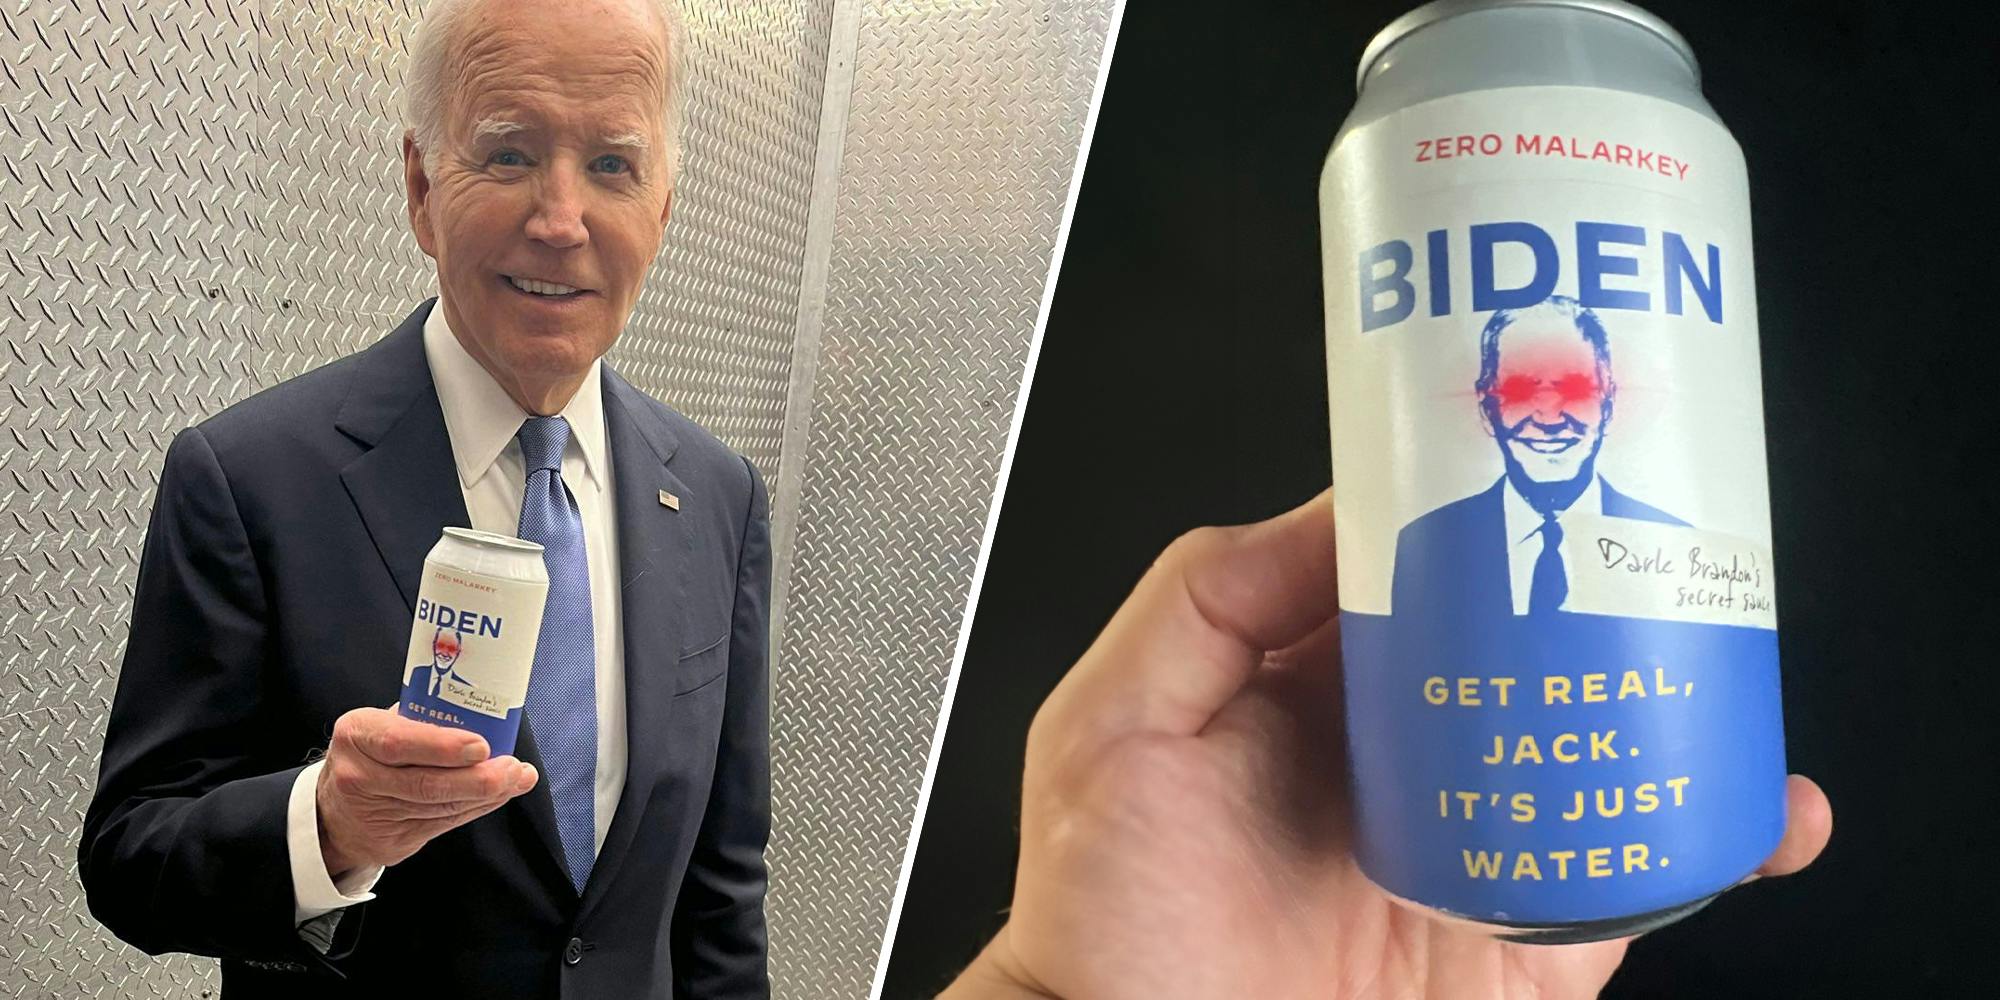 ‘Delete this now’: Biden’s joke about drinking performance-enhancing water before the debate utterly backfired